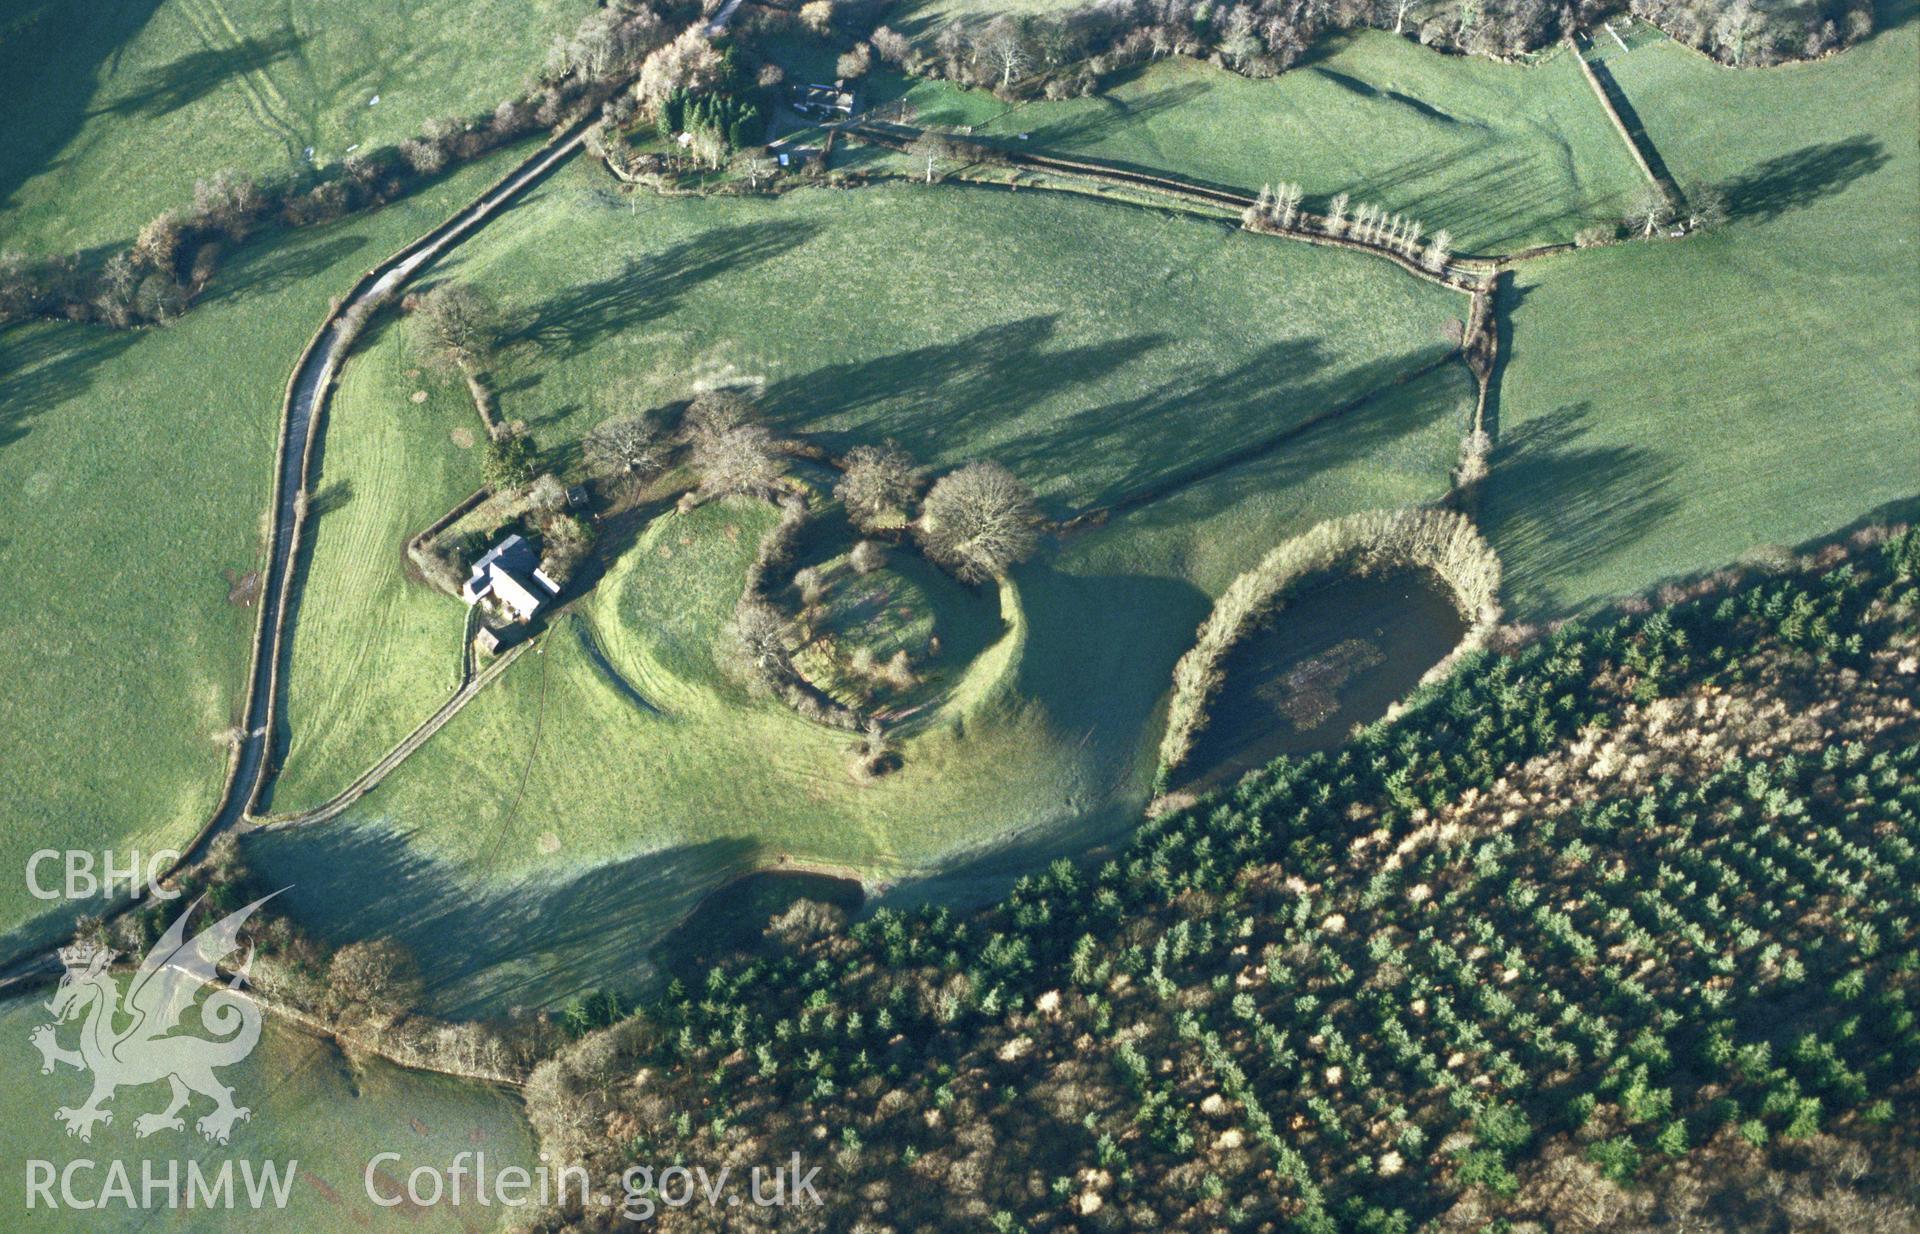 RCAHMW colour slide oblique aerial photograph of Sycharth Castle, Llansilin, taken by C.R.Musson on the 22/12/1996